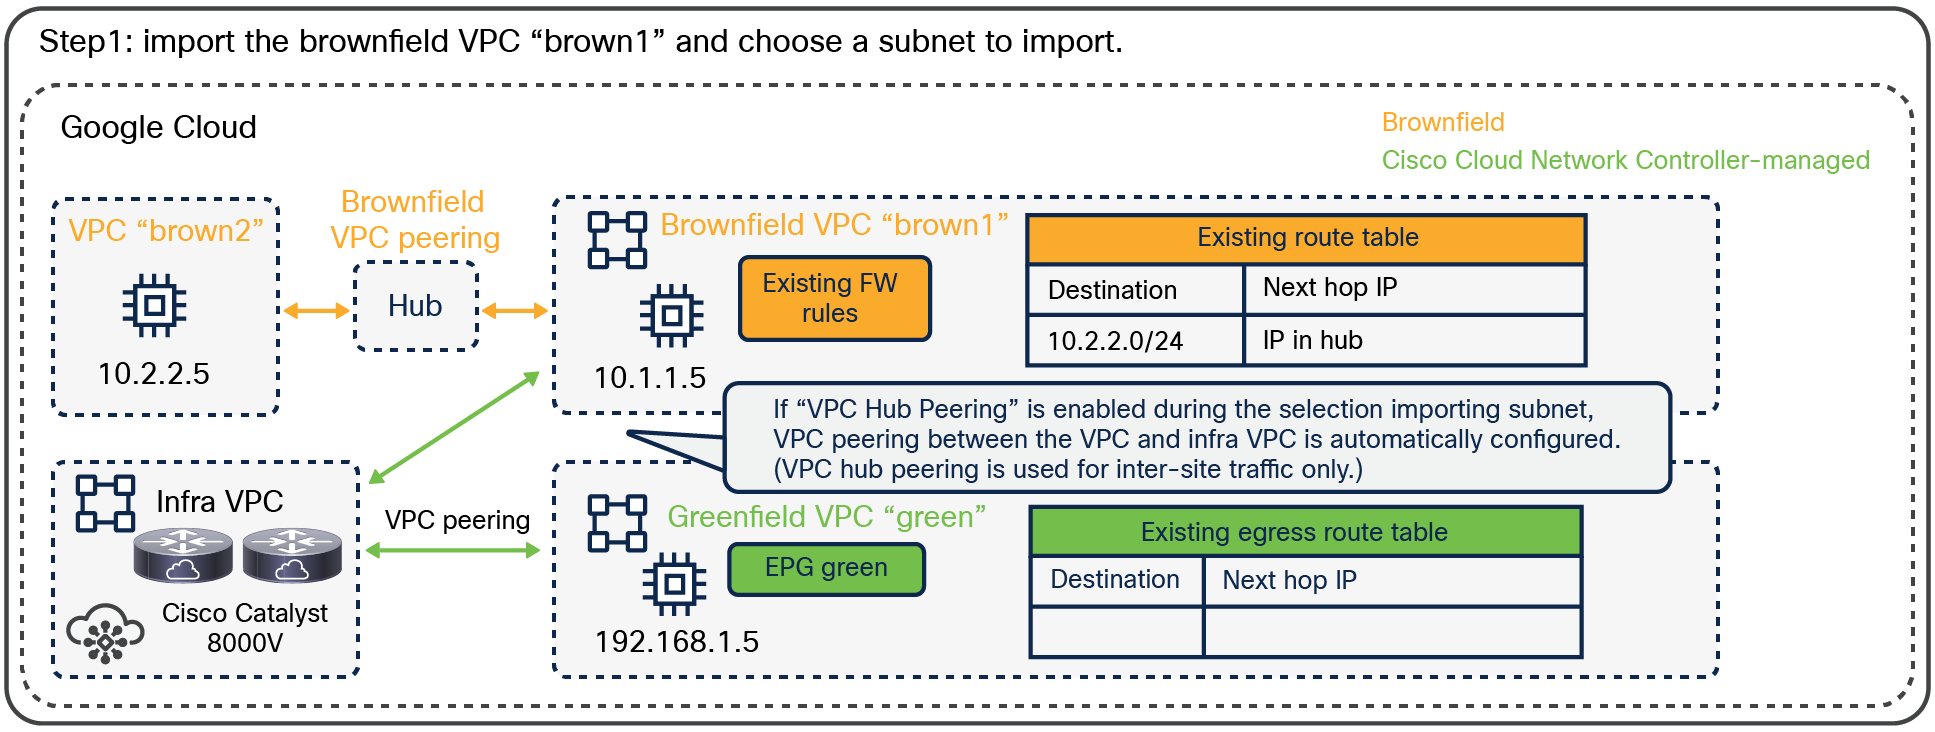 An example of a brownfield VPC: after importing a brownfield VPC